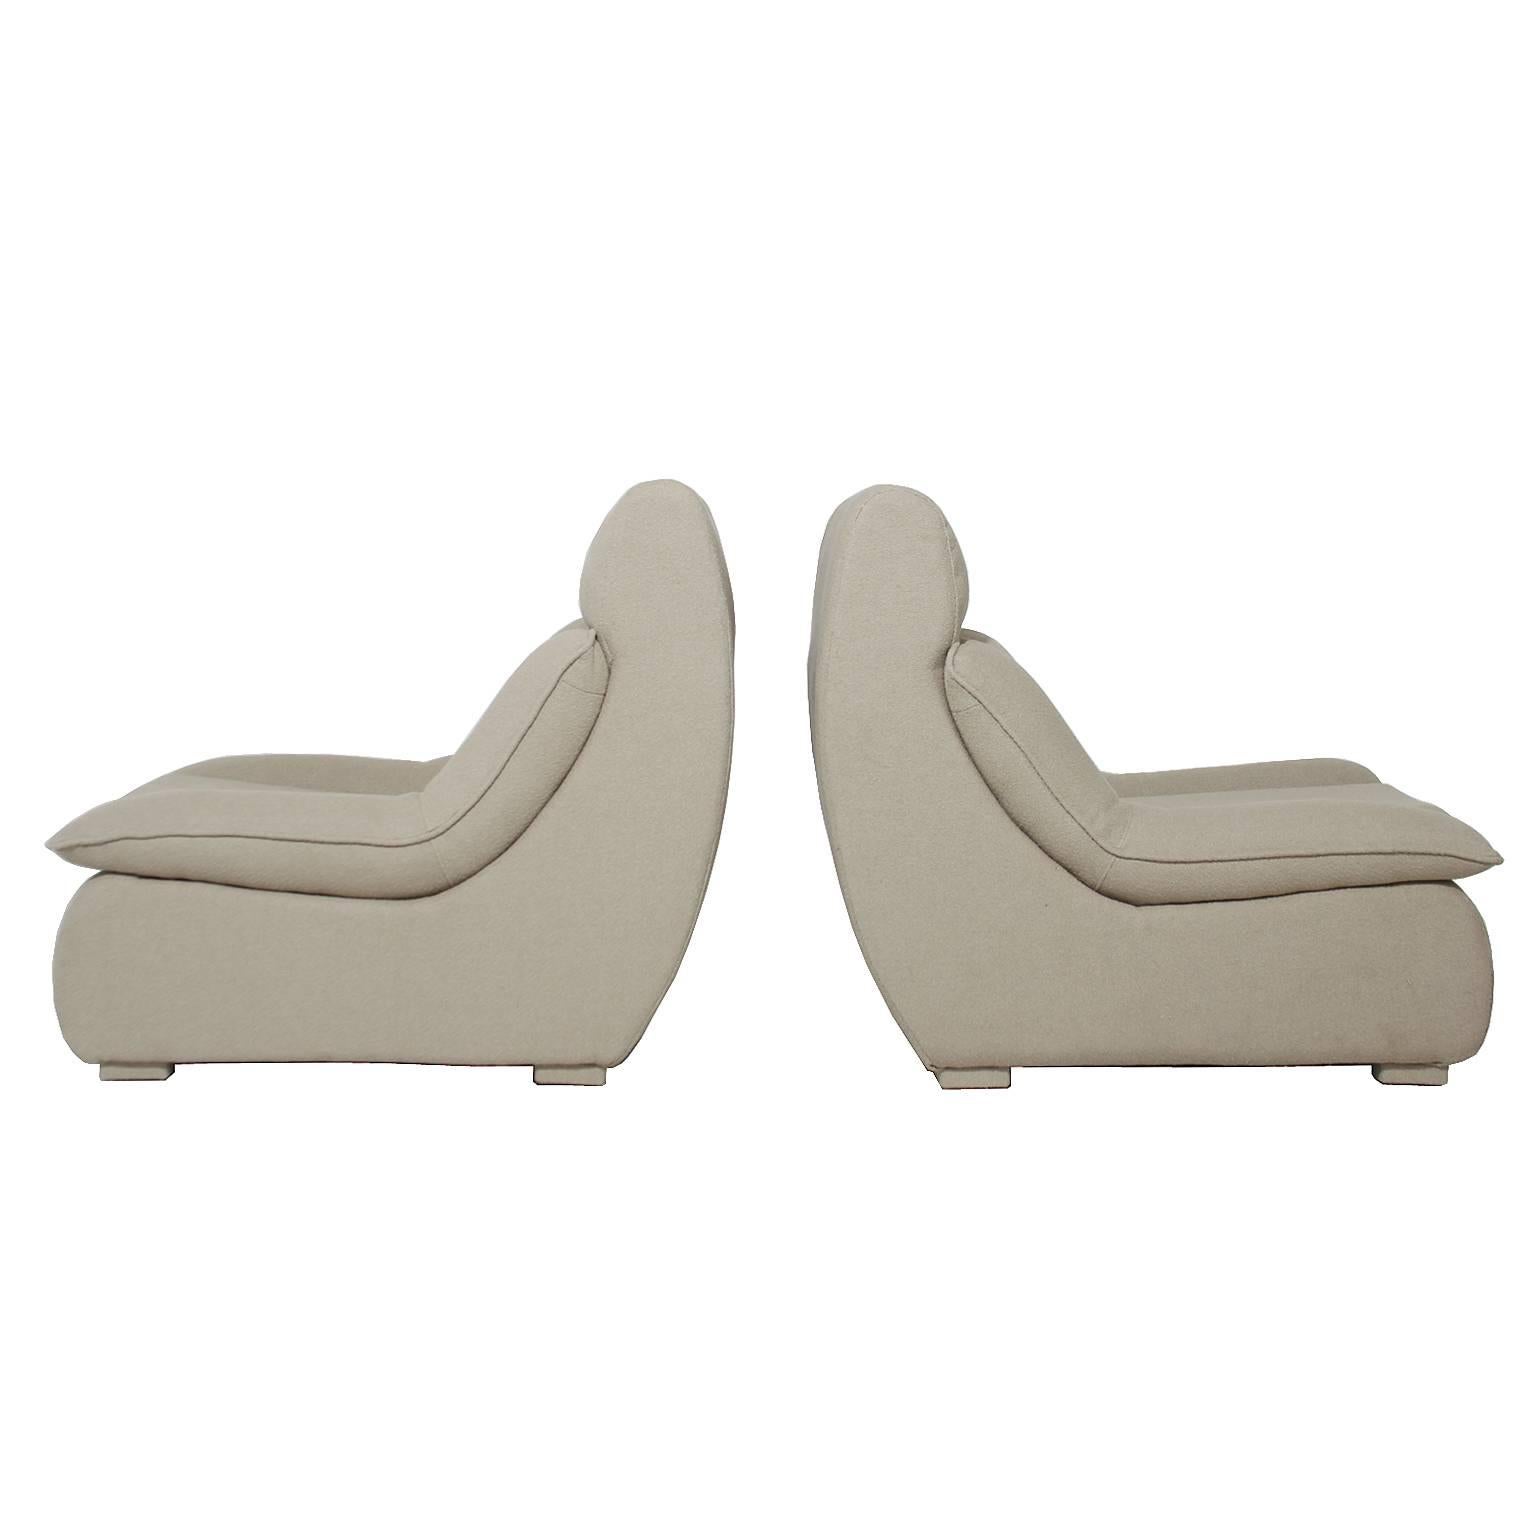 Late 20th Century Pair of Vintage Brazilian Lounge Chairs